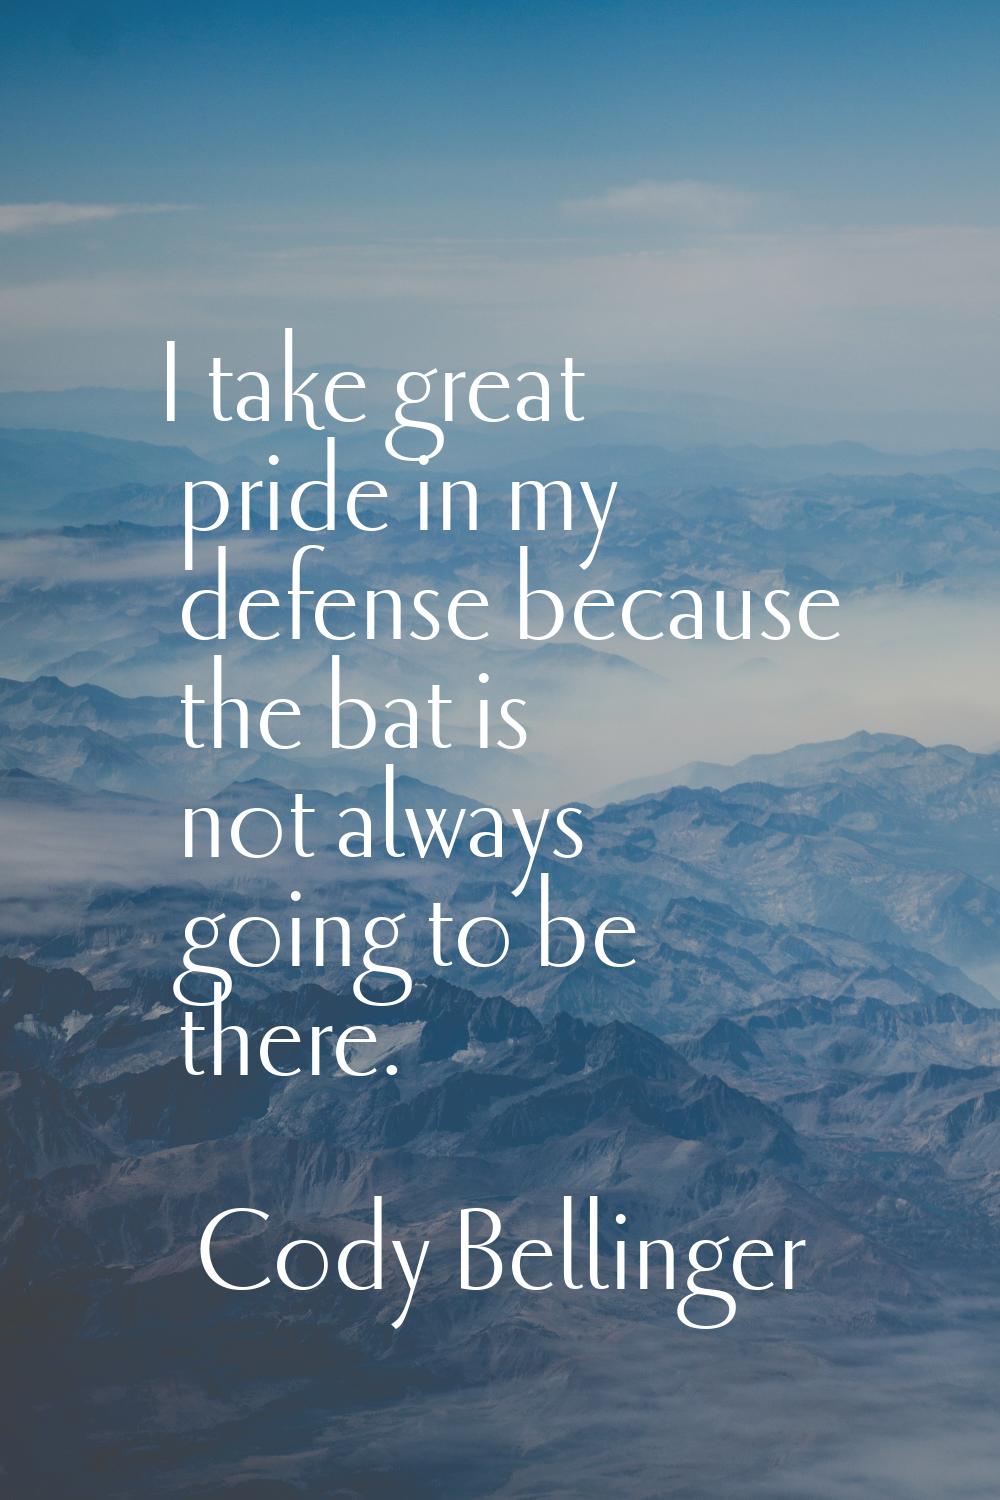 I take great pride in my defense because the bat is not always going to be there.